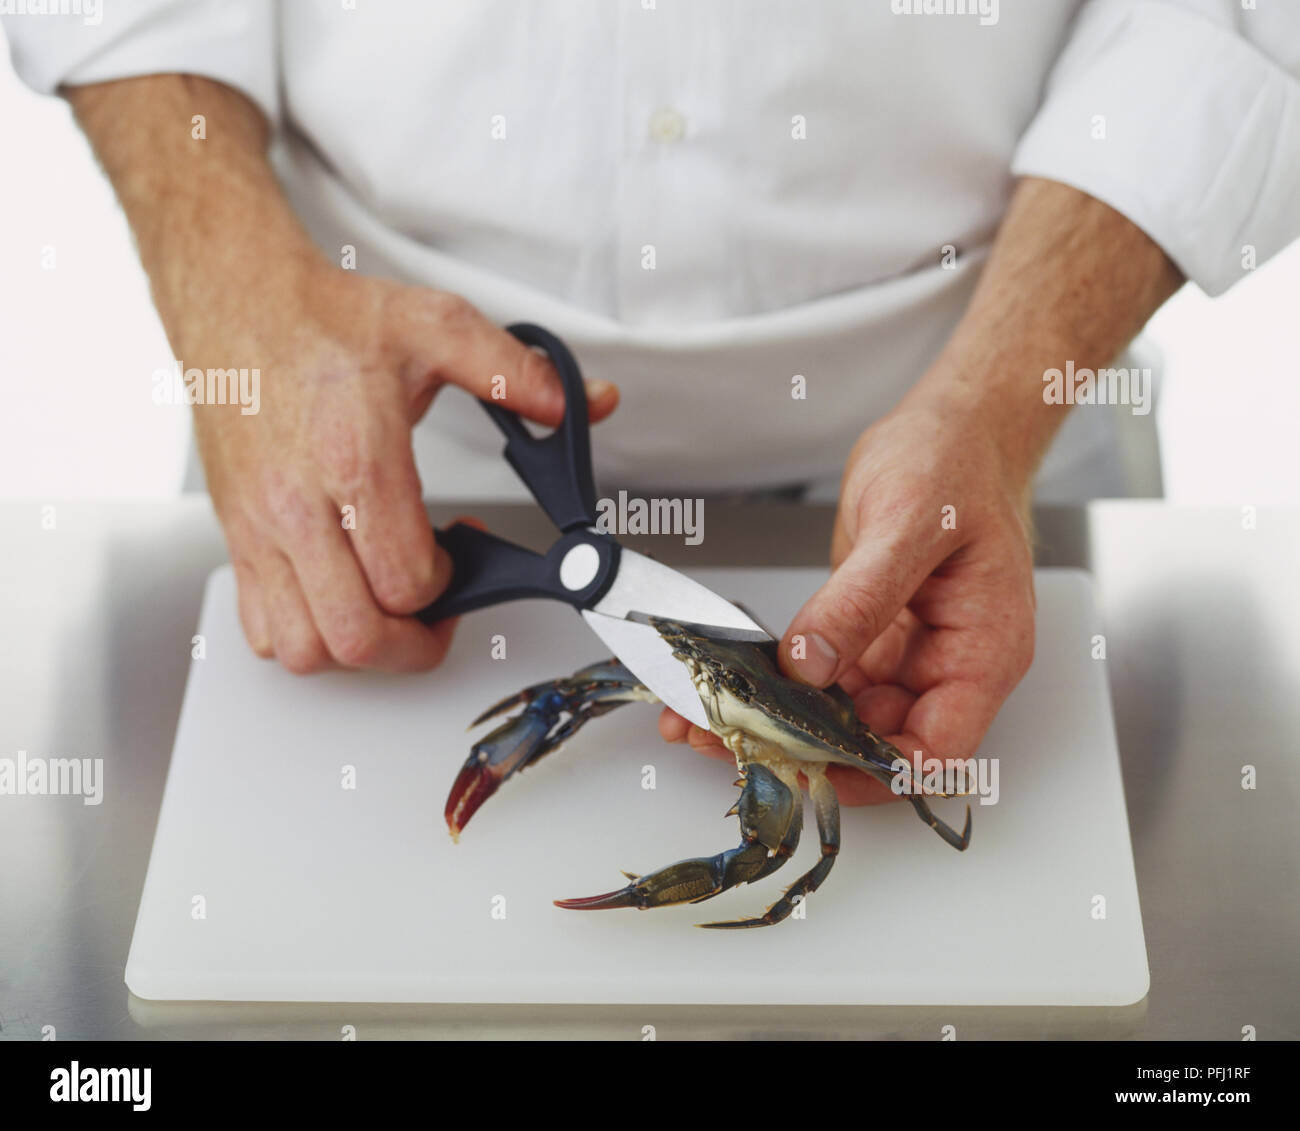 Using kitchen scissors to cut across front of a live crab, removing eyes and mouth Stock Photo